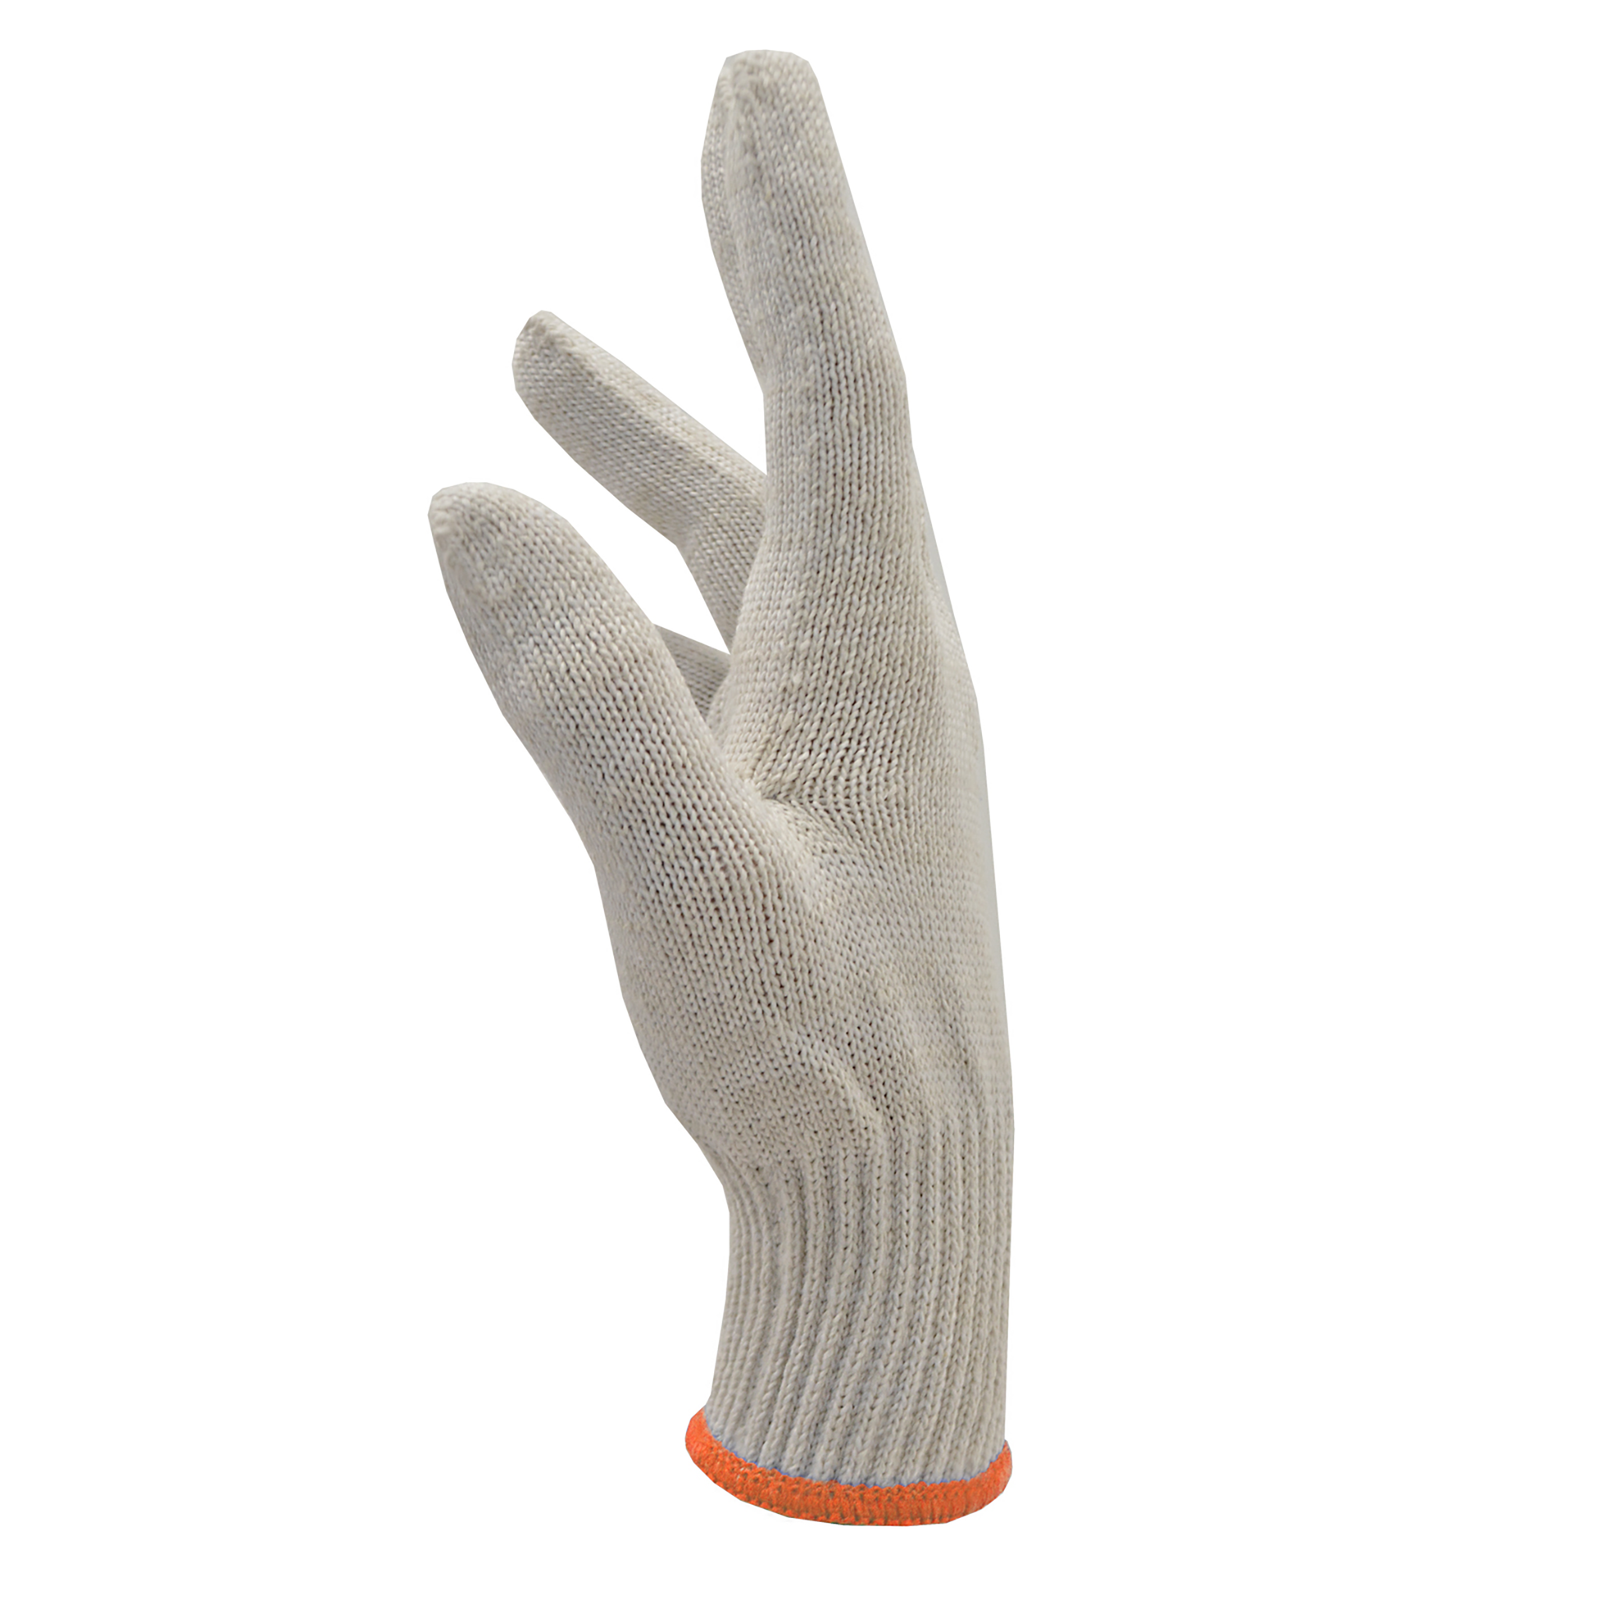 Cut Resistant Knit Work Gloves (pack of 12 gloves) / Gray